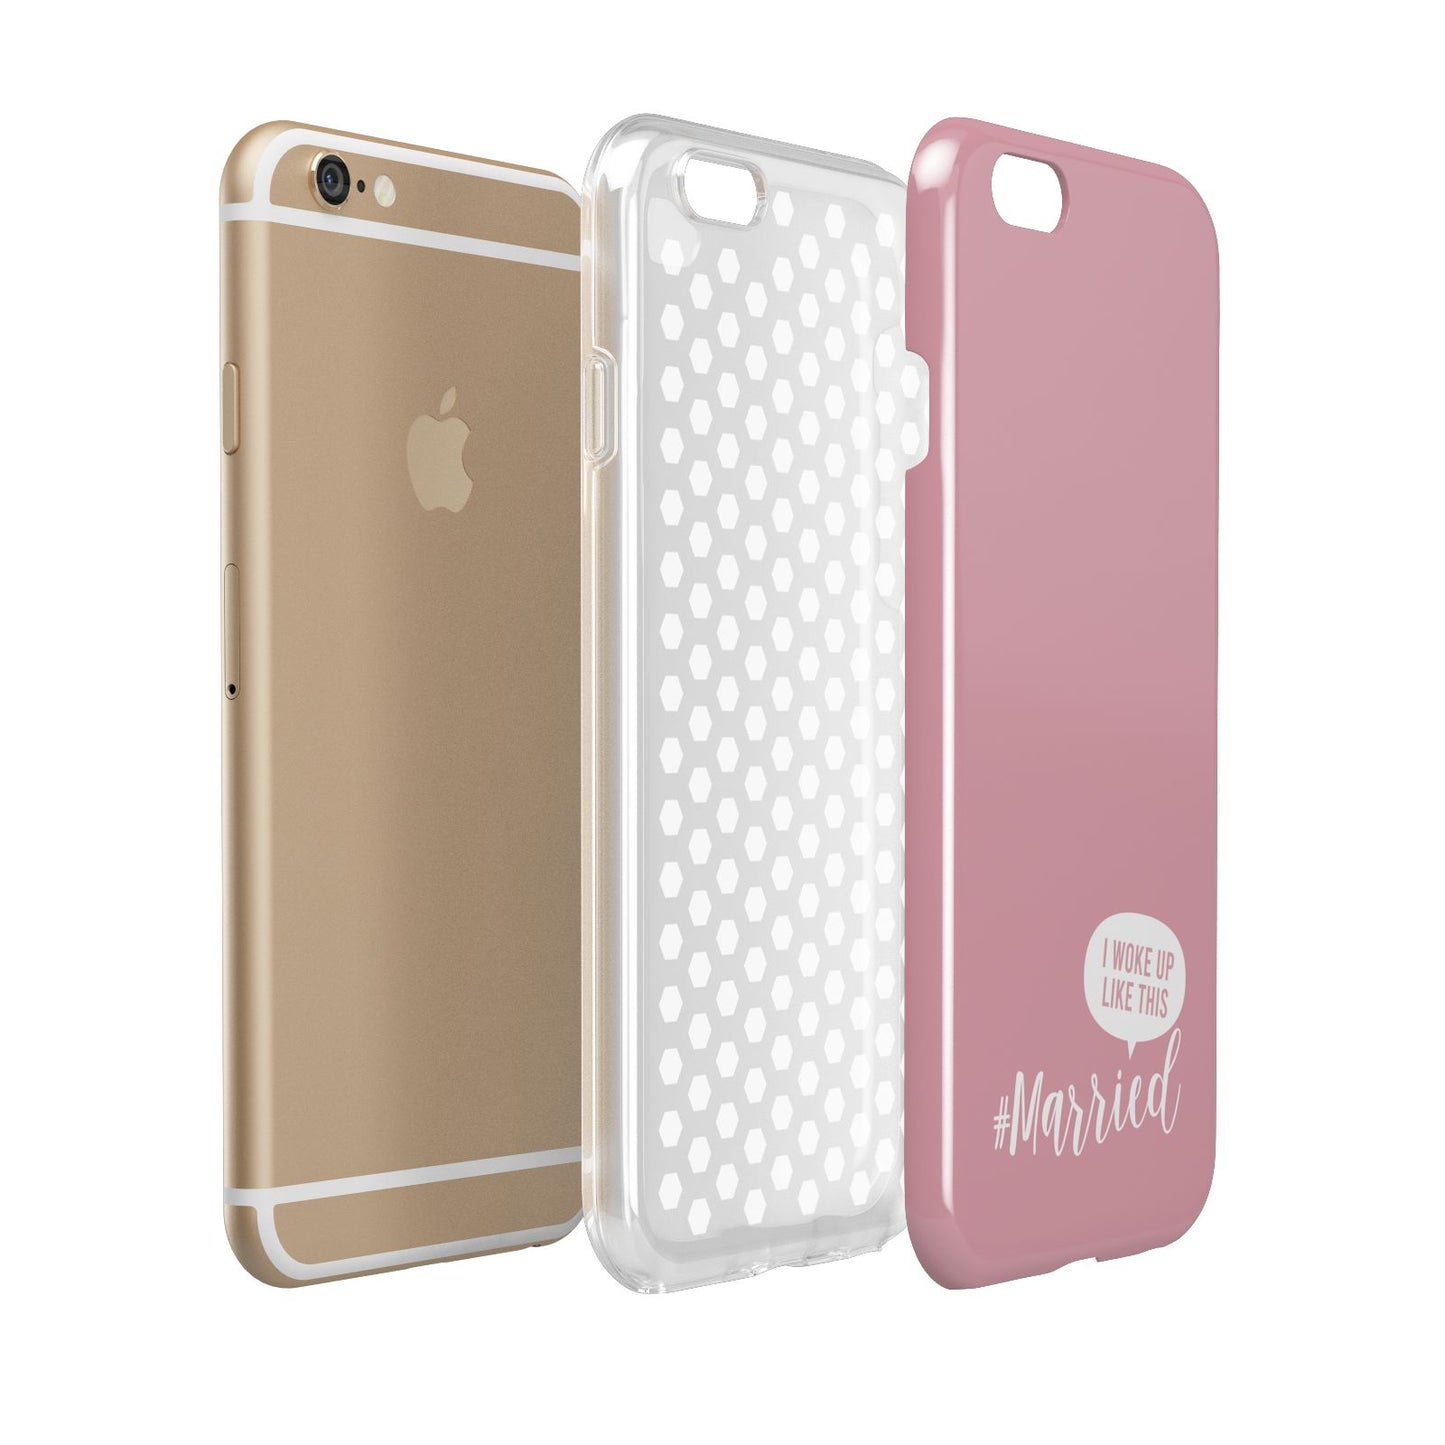 I Woke Up Like This Married Apple iPhone 6 3D Tough Case Expanded view